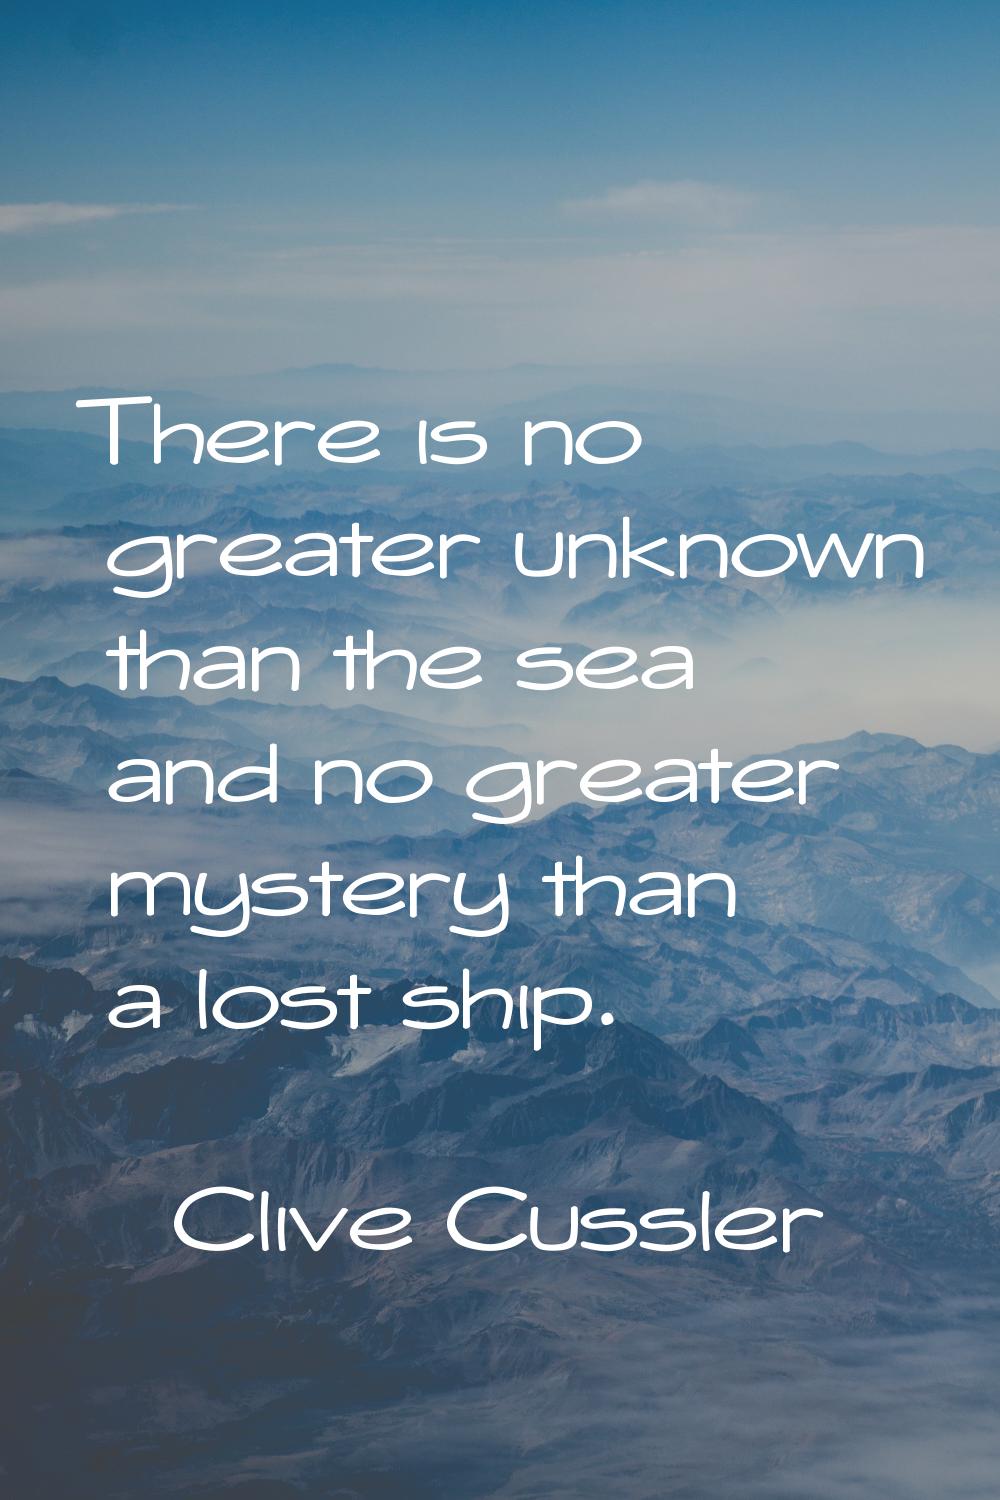 There is no greater unknown than the sea and no greater mystery than a lost ship.